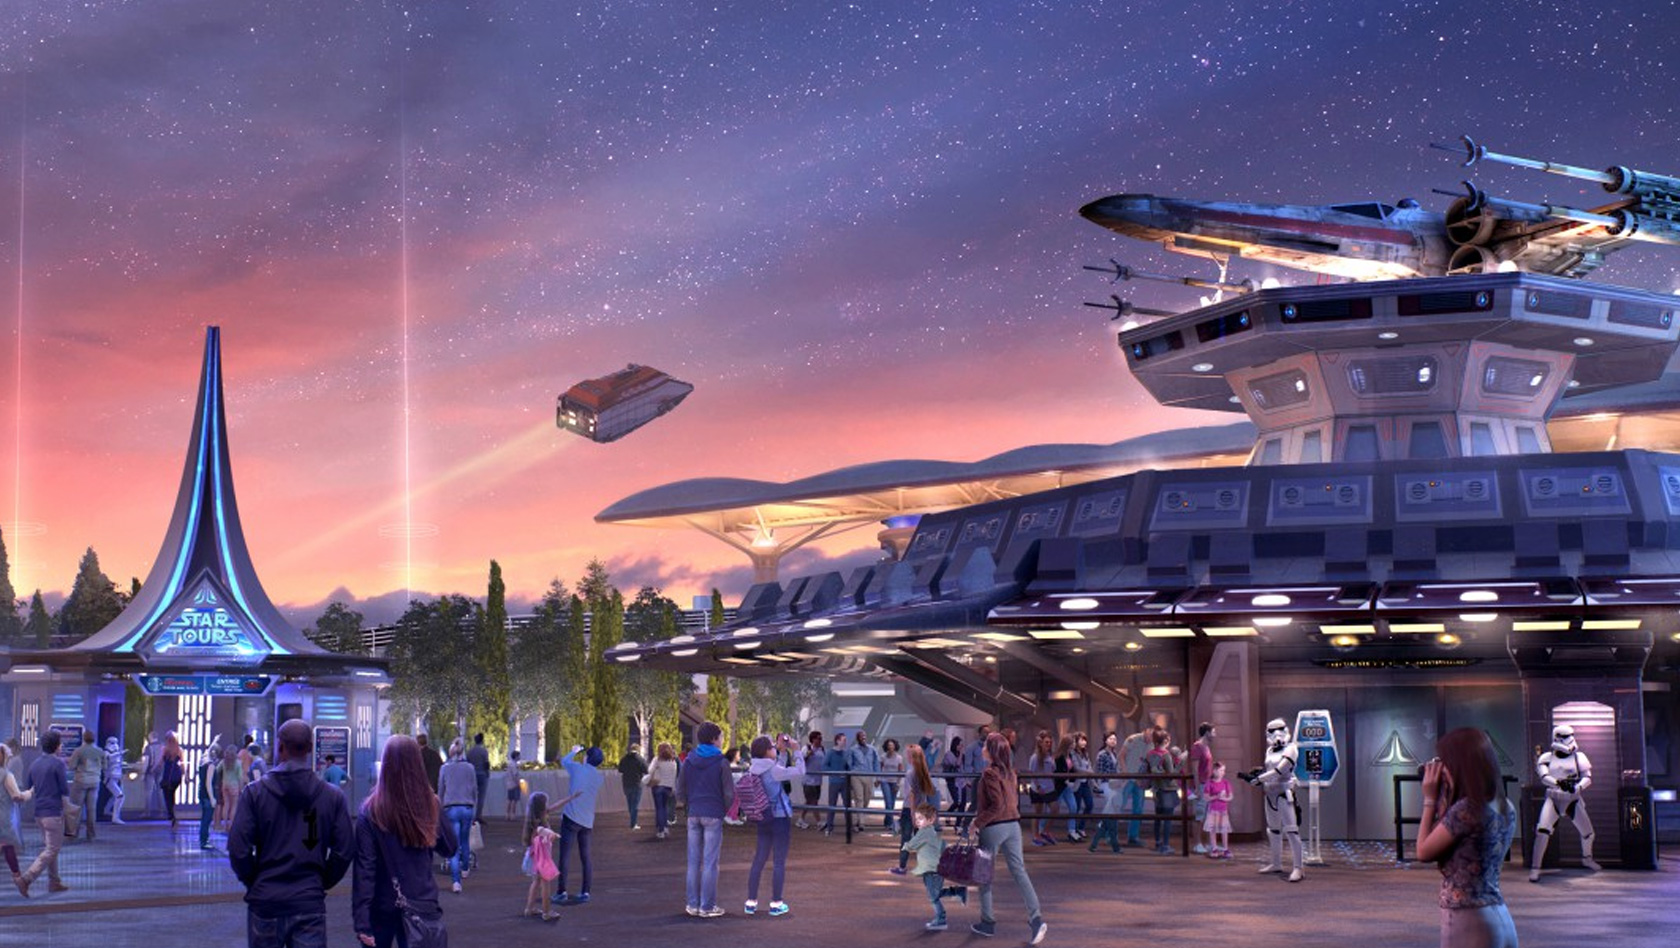 attractions star tours